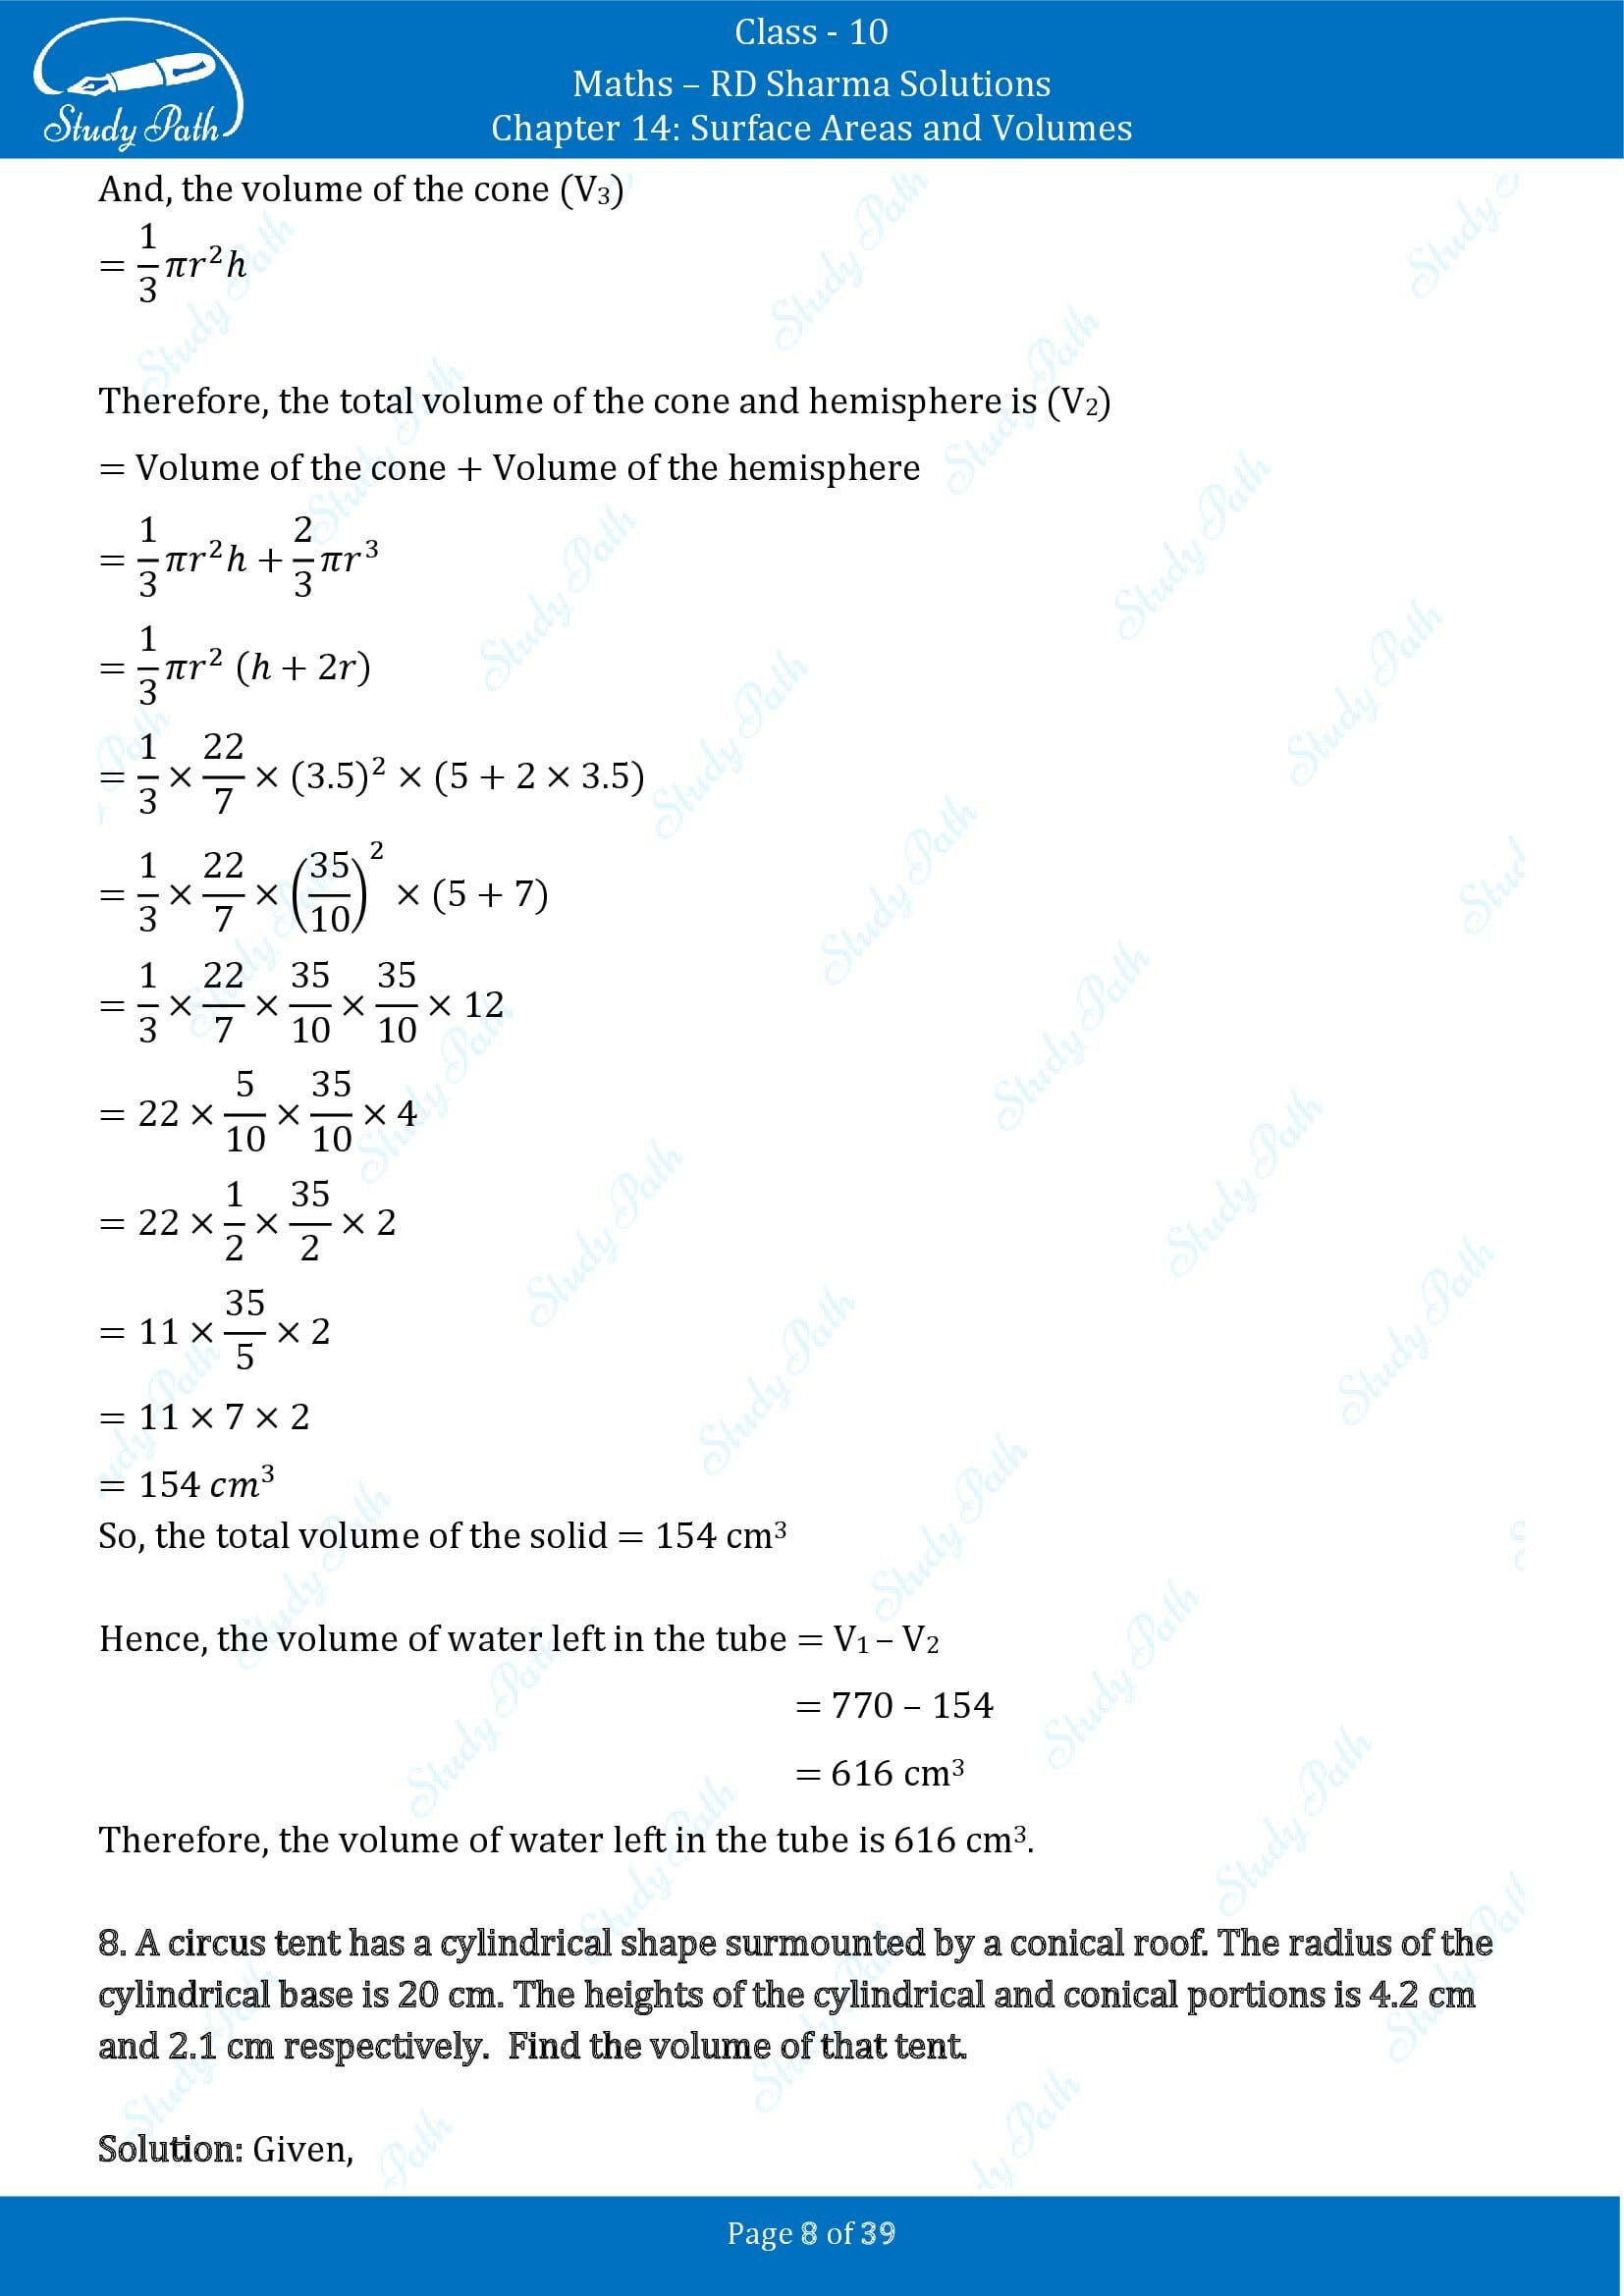 RD Sharma Solutions Class 10 Chapter 14 Surface Areas and Volumes Exercise 14.2 00008